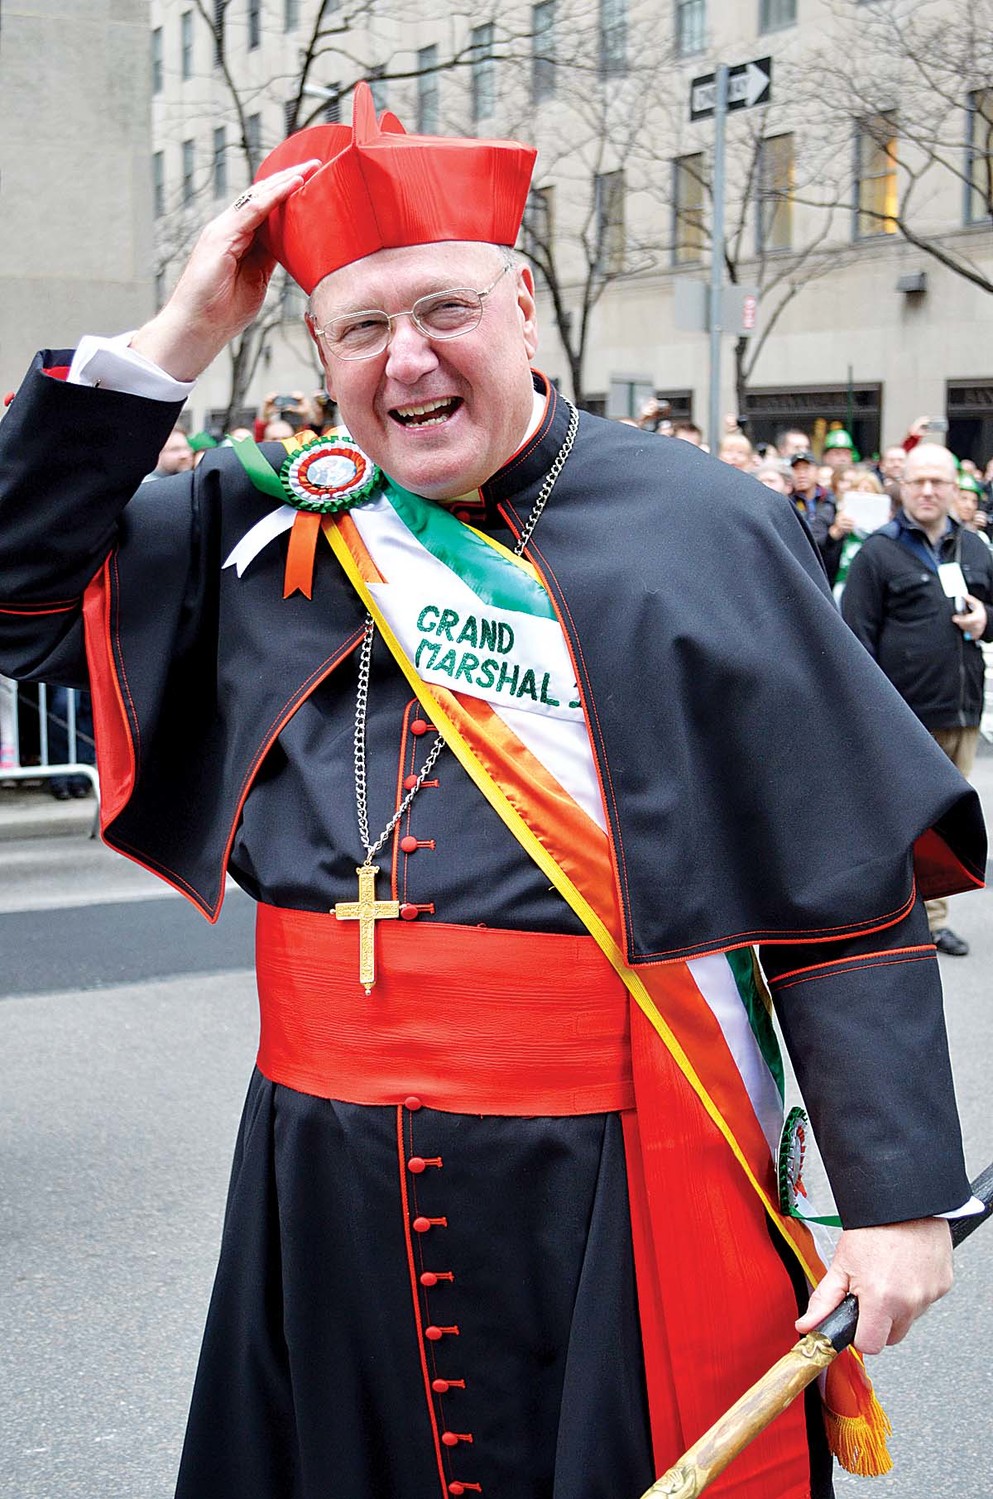 Cardinal Dolan proudly served as grand marshal of the 2015 New York City St. Patrick’s Day Parade.